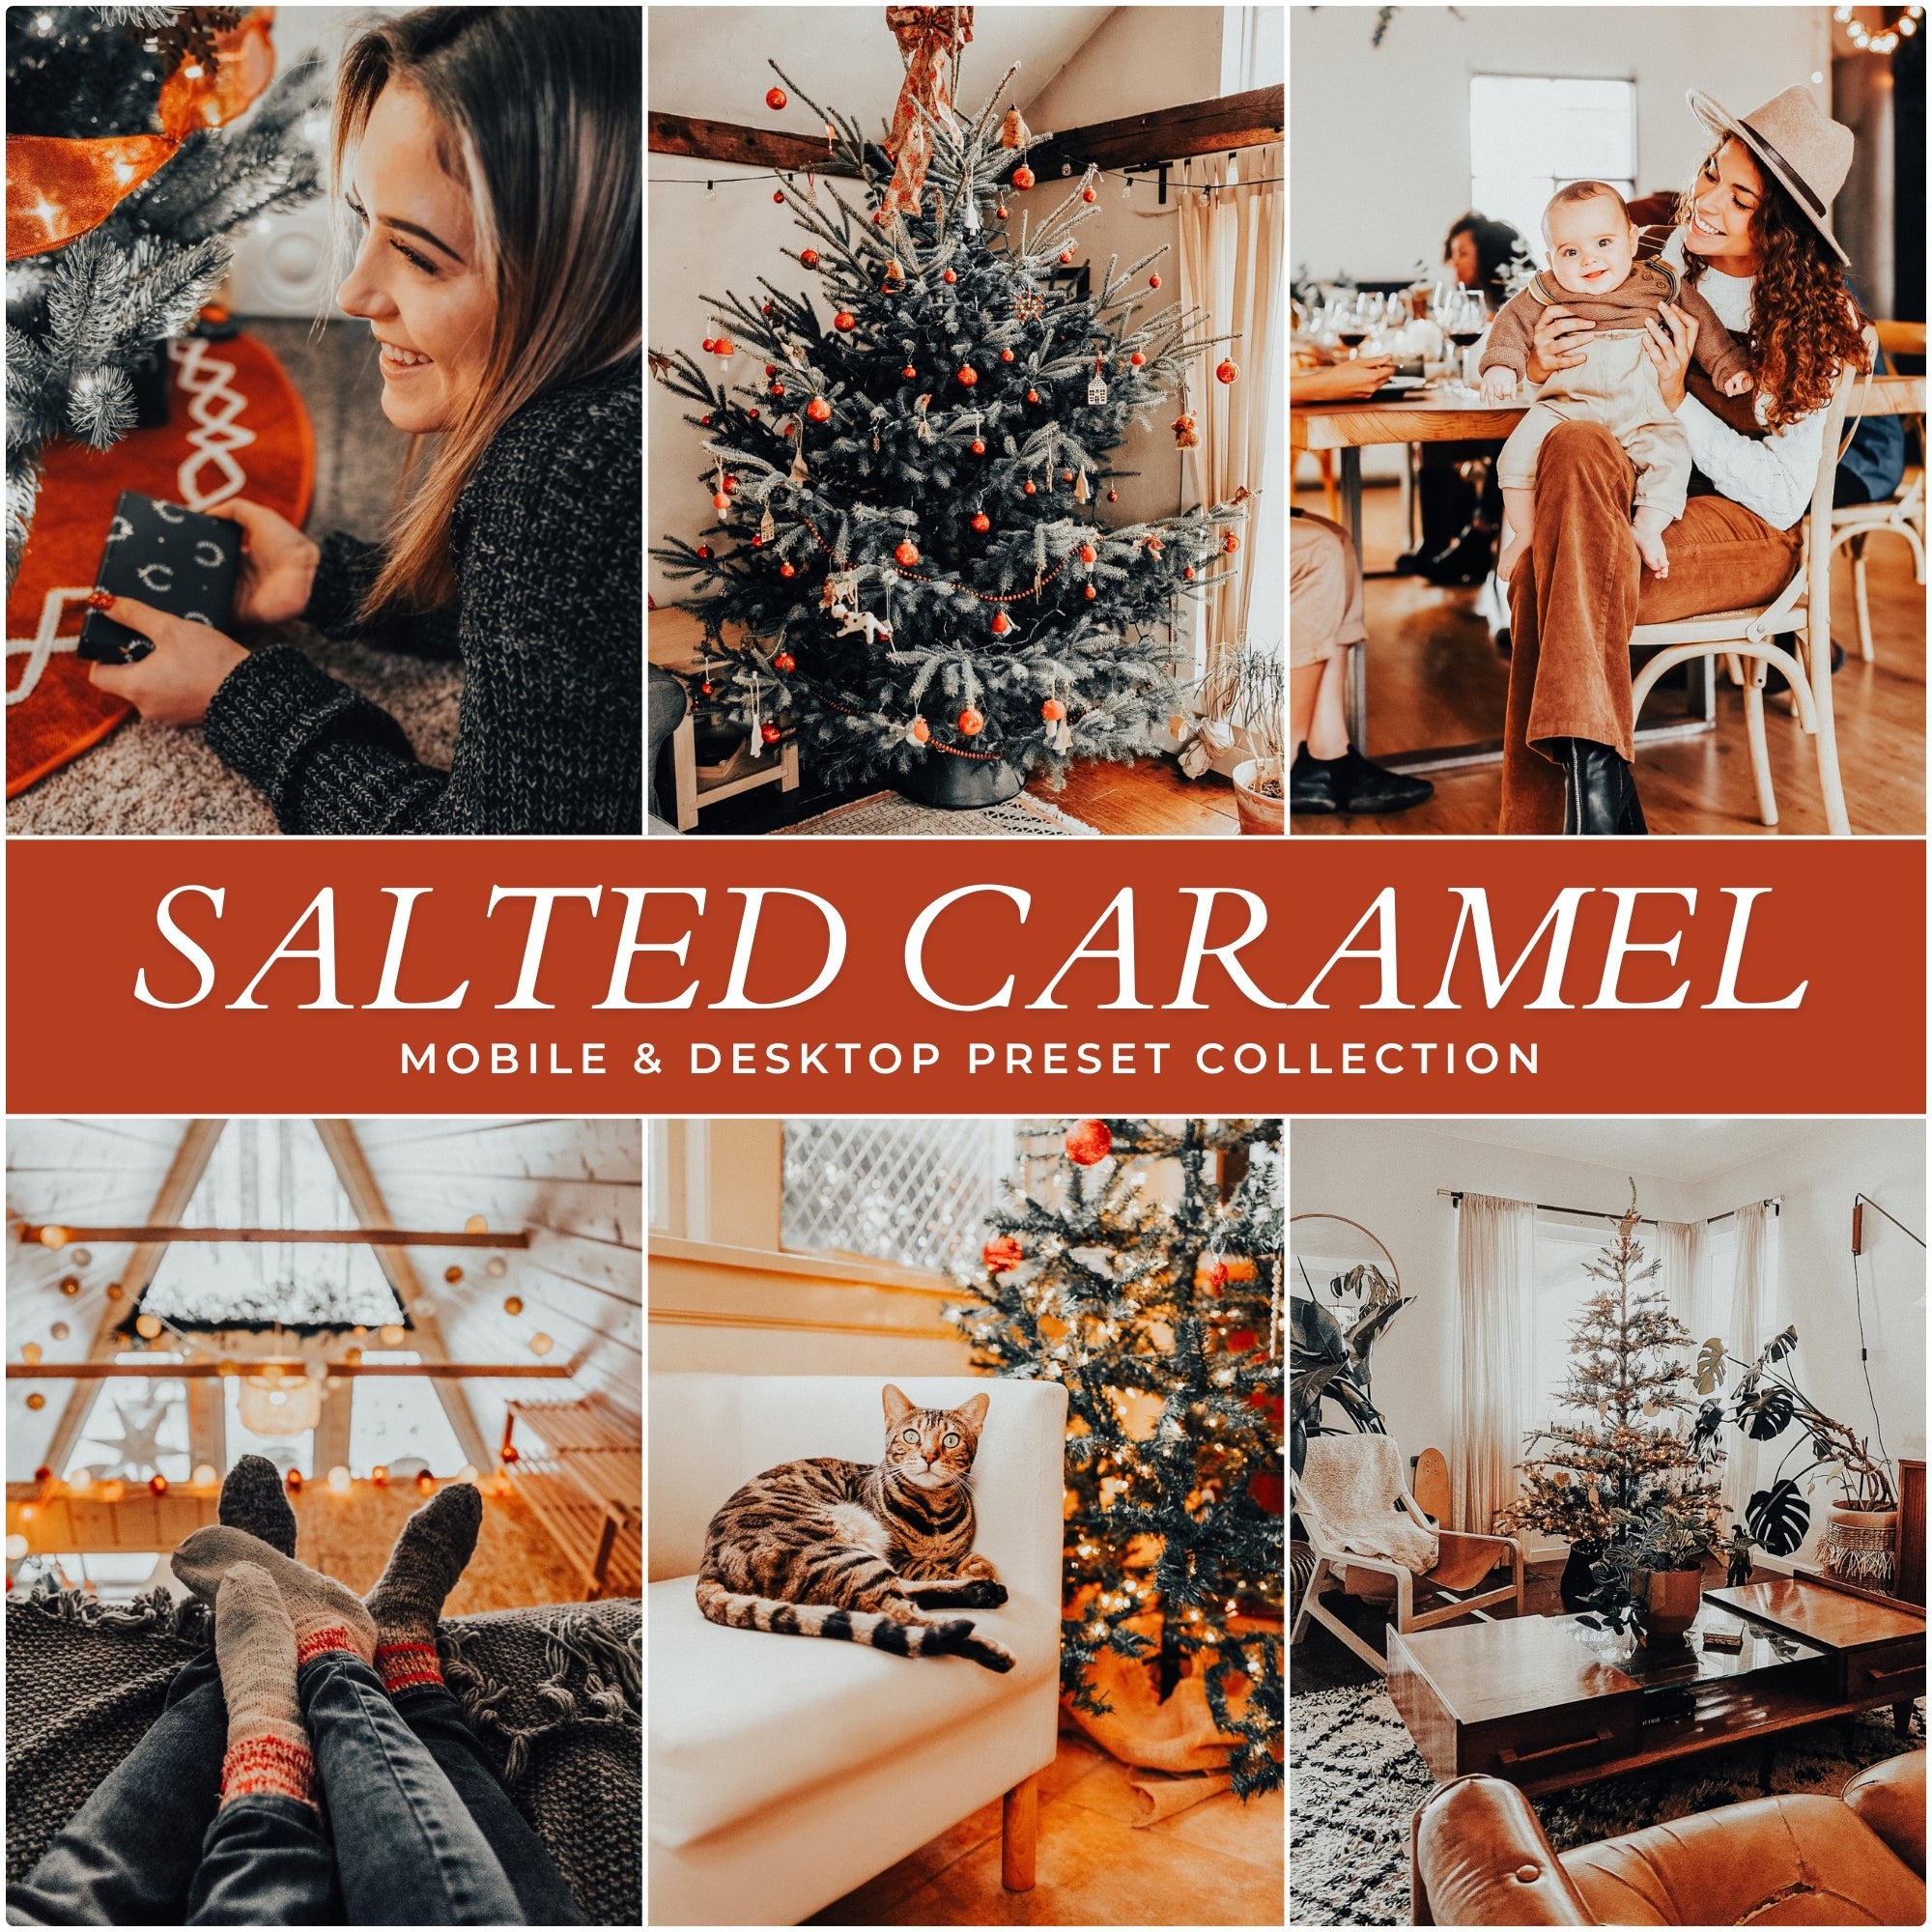 Salted Caramel Christmas Lightroom Presets For Photographers and Instagram Influencers Photo Editing In Adobe Lightroom By Lou And Marks Presets